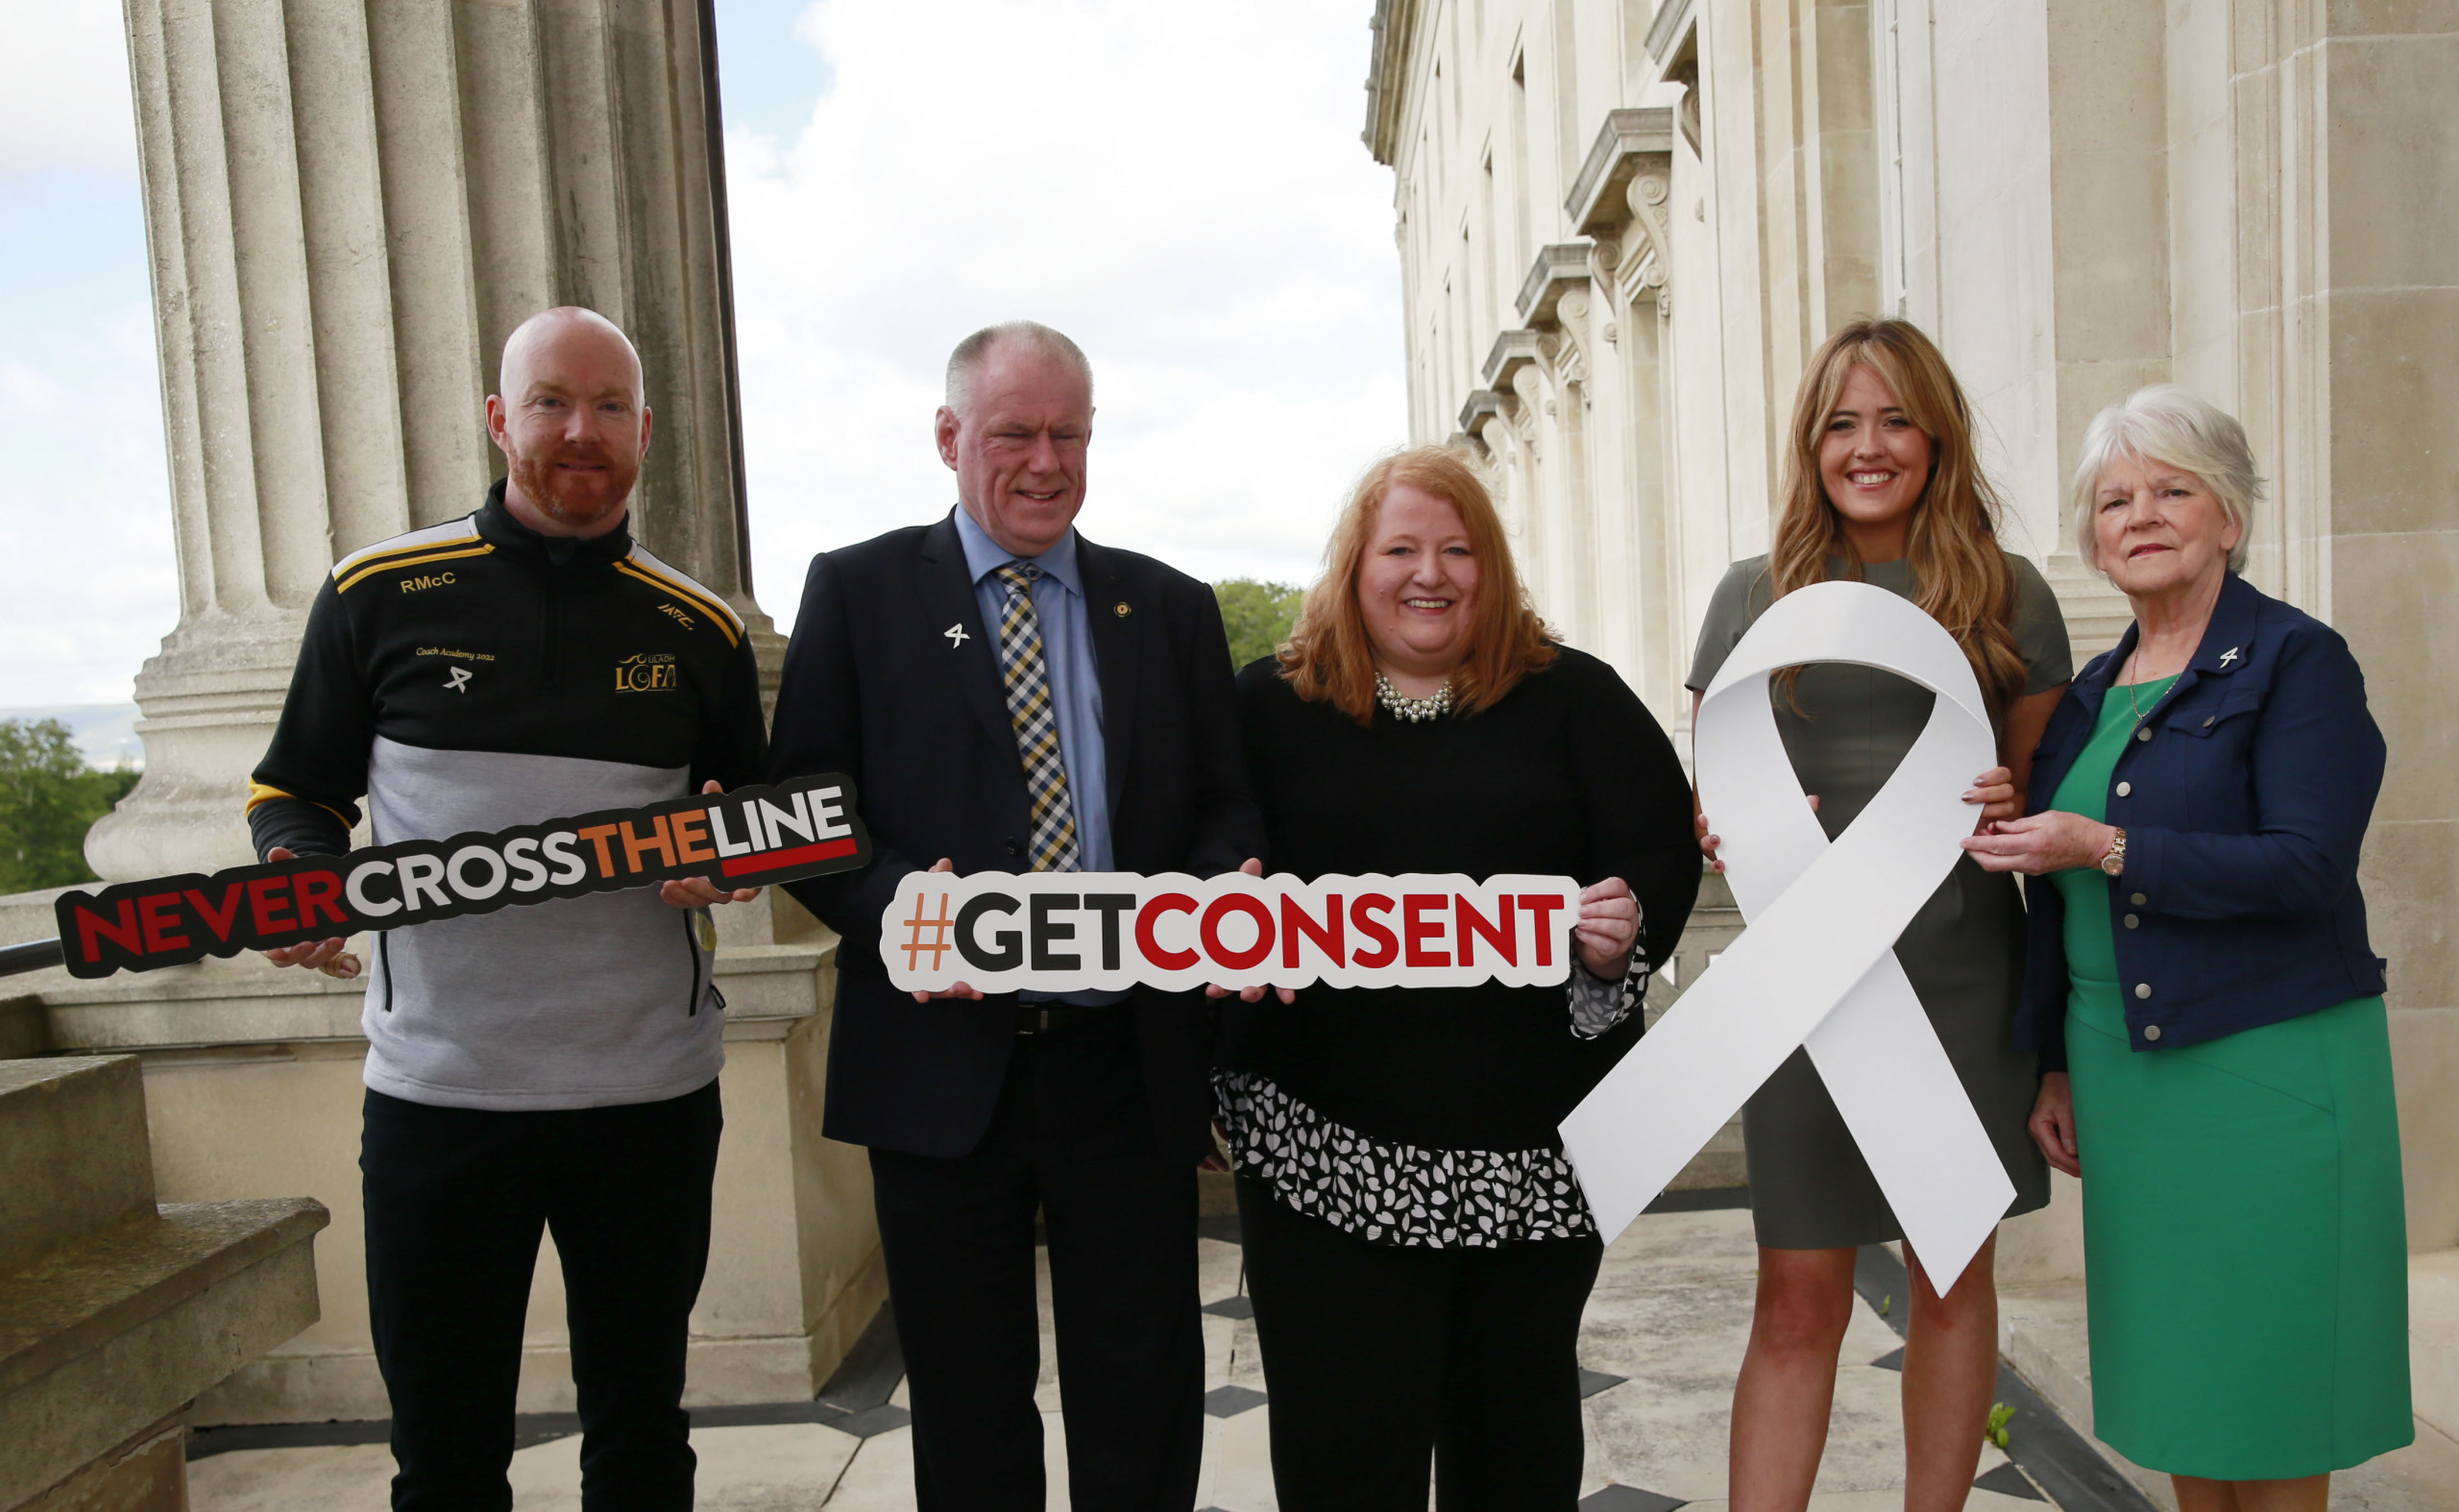 Ulster GAA launches ‘Never Cross The Line #GetConsent’ campaign